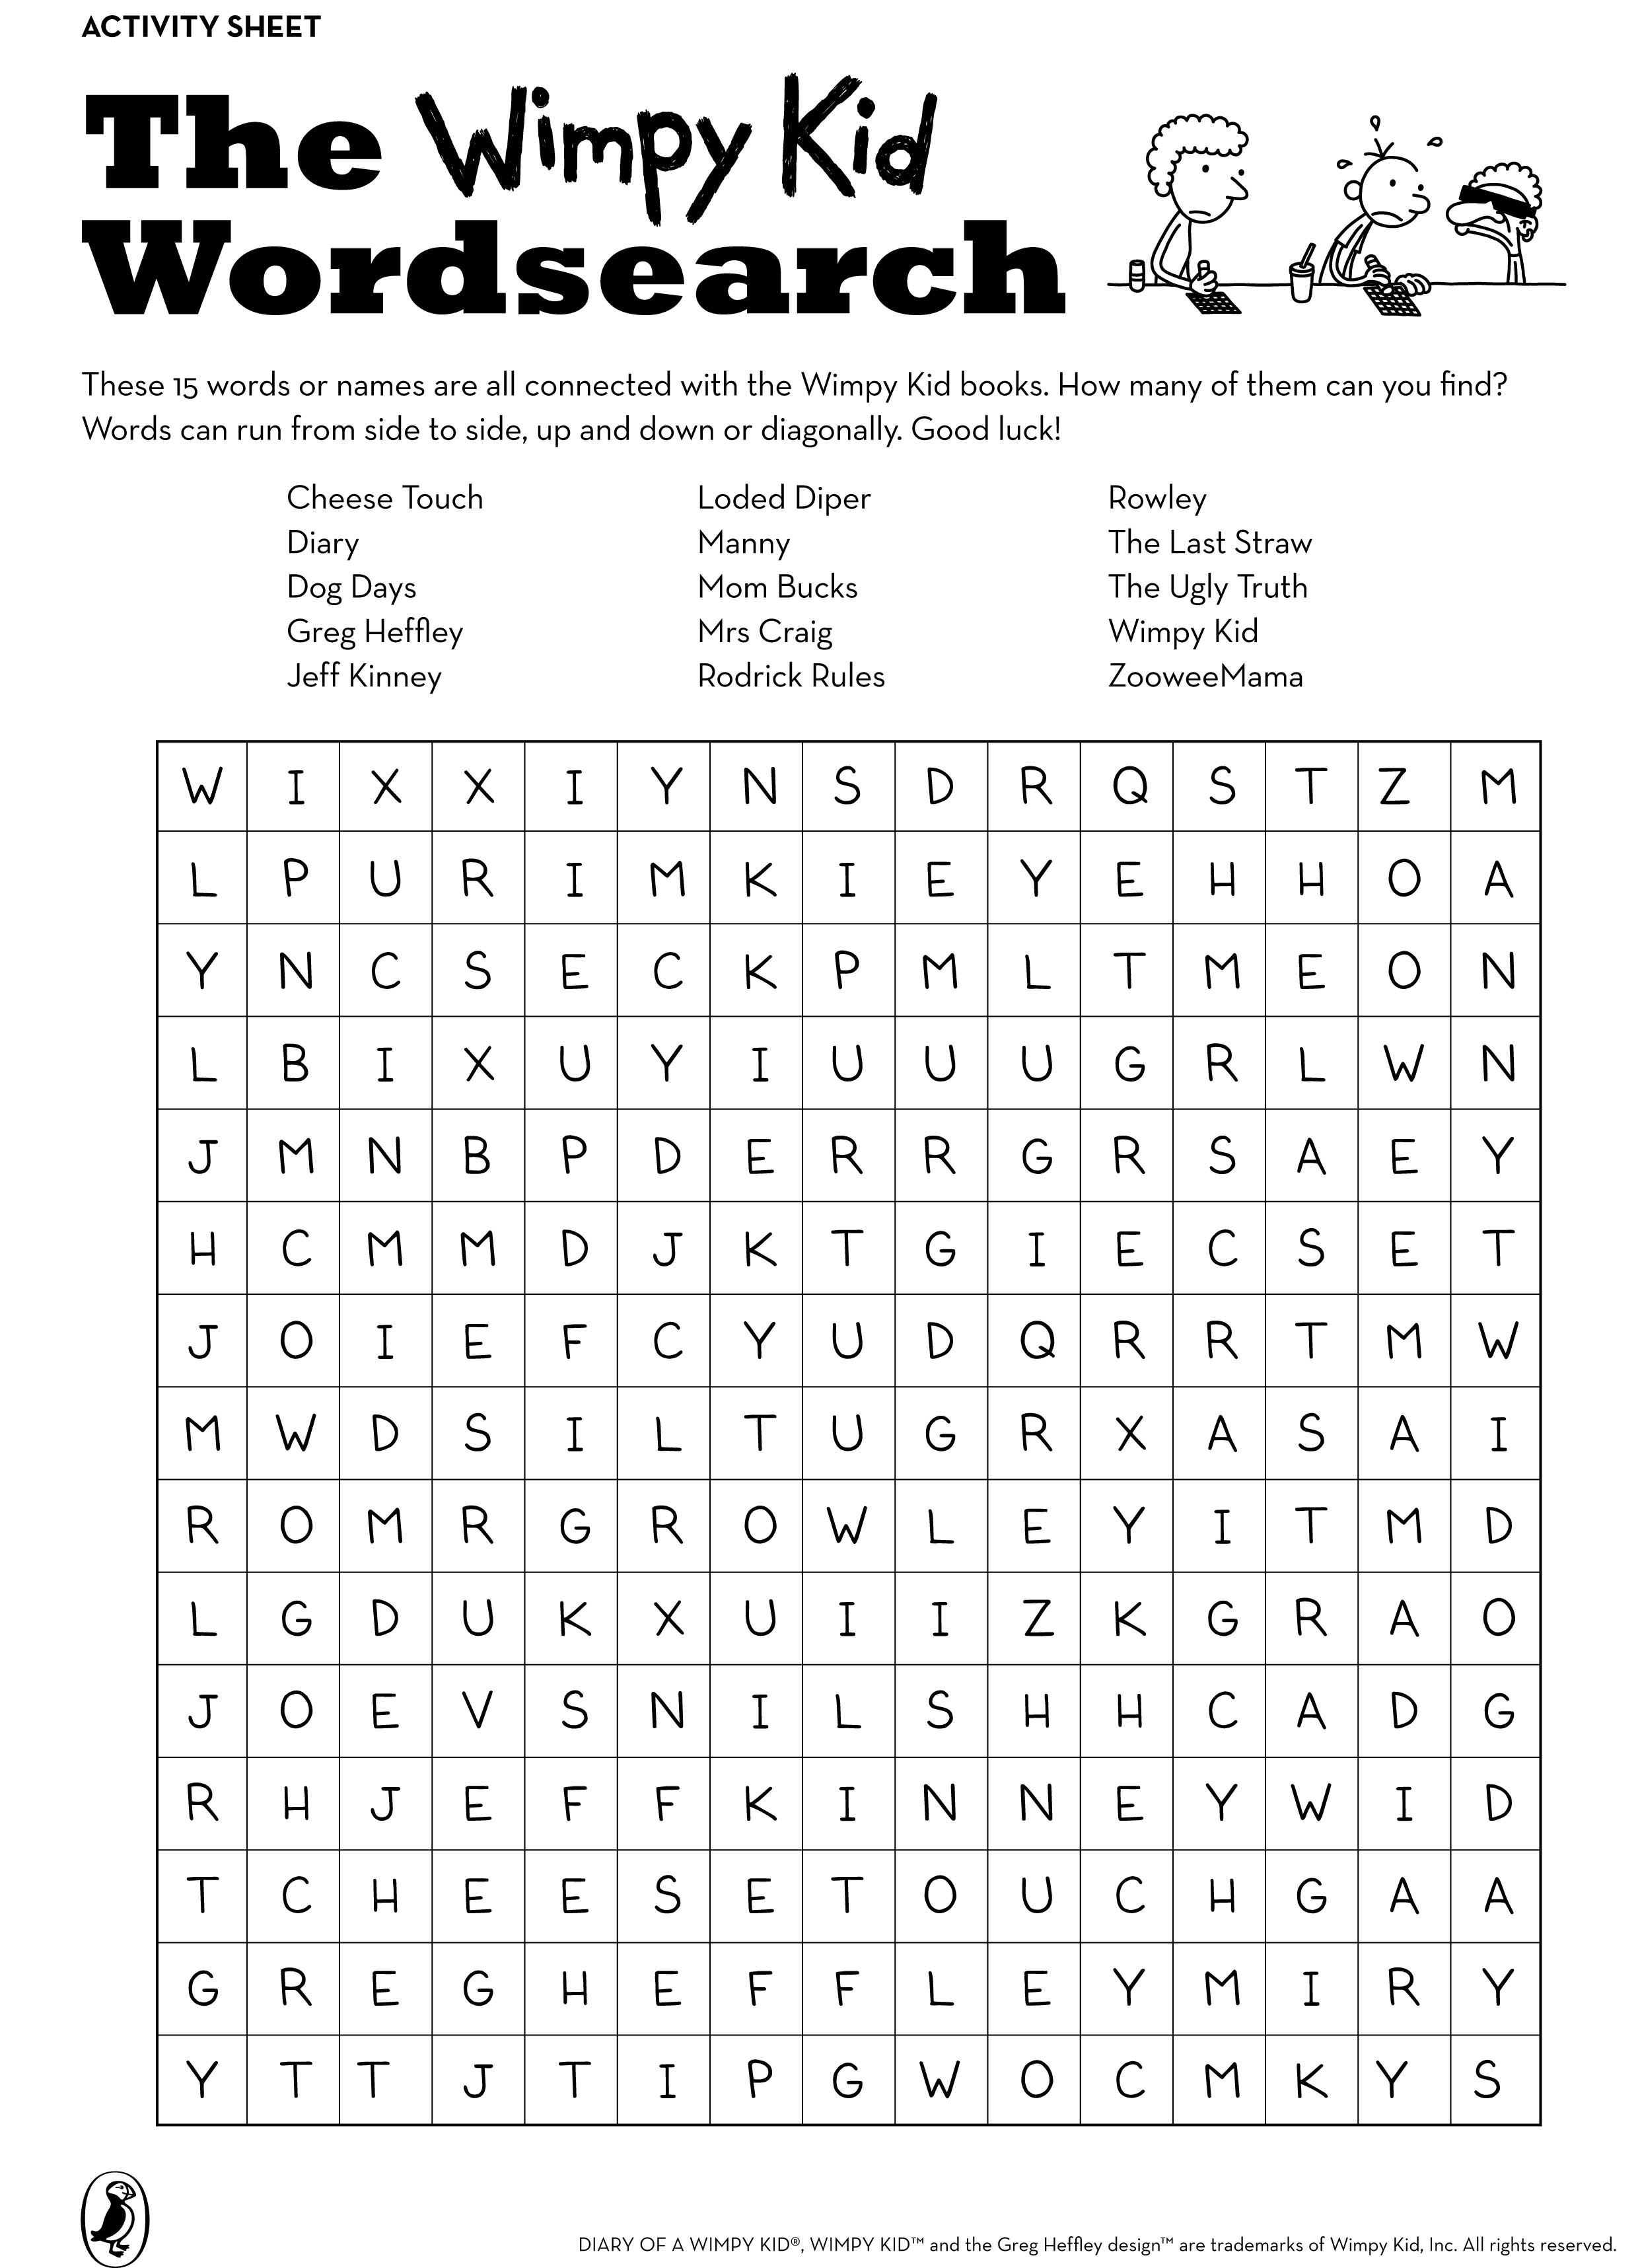 diary-of-a-wimpy-kid-free-printable-in-2020-wimpy-kid-books-kids-word-search-wimpy-kid